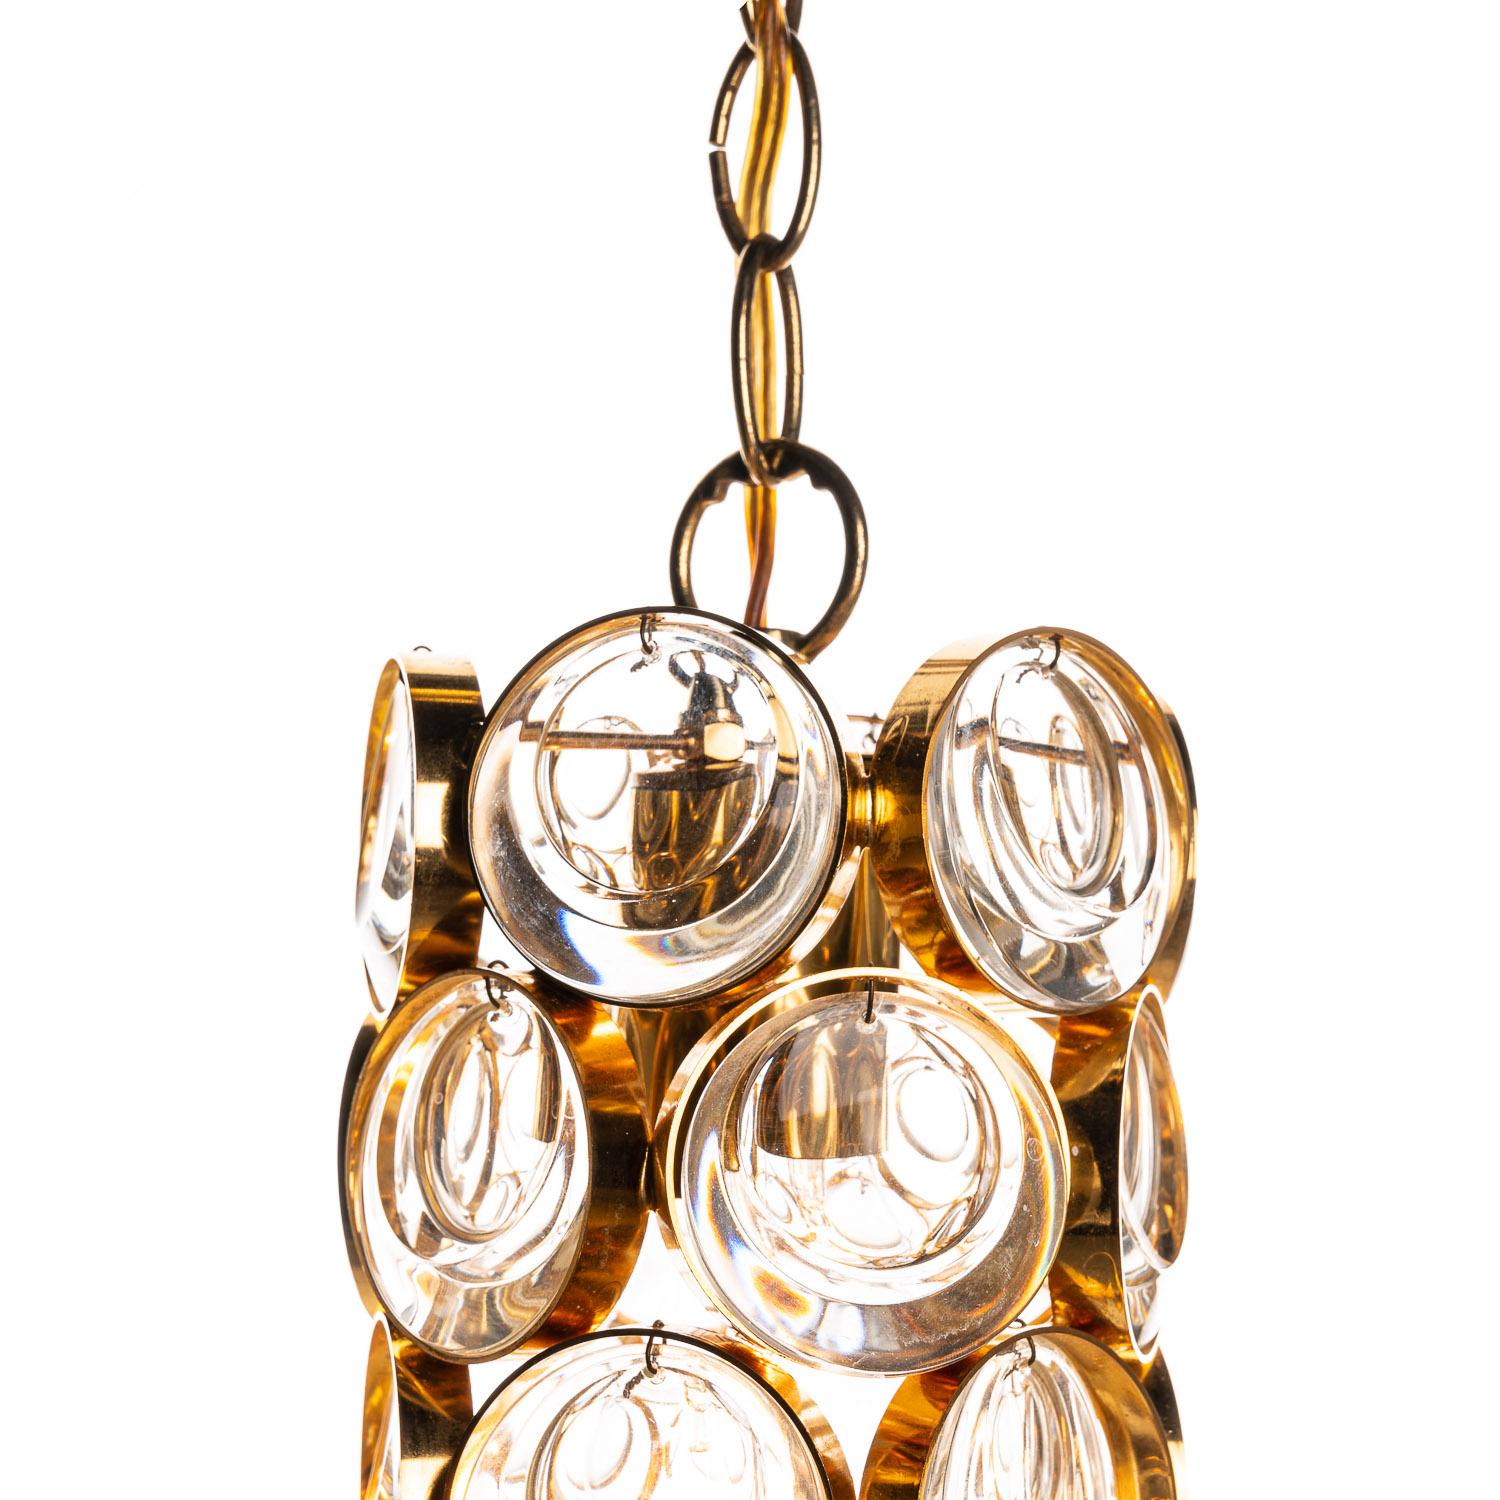 Petit pendant by Palwa. Consist of a gilded brass frame & rings with crystal Glass “lenses”. It holds one E27 socket and is in excellent condition. 
Large chandeliers, wall lights and pendants.